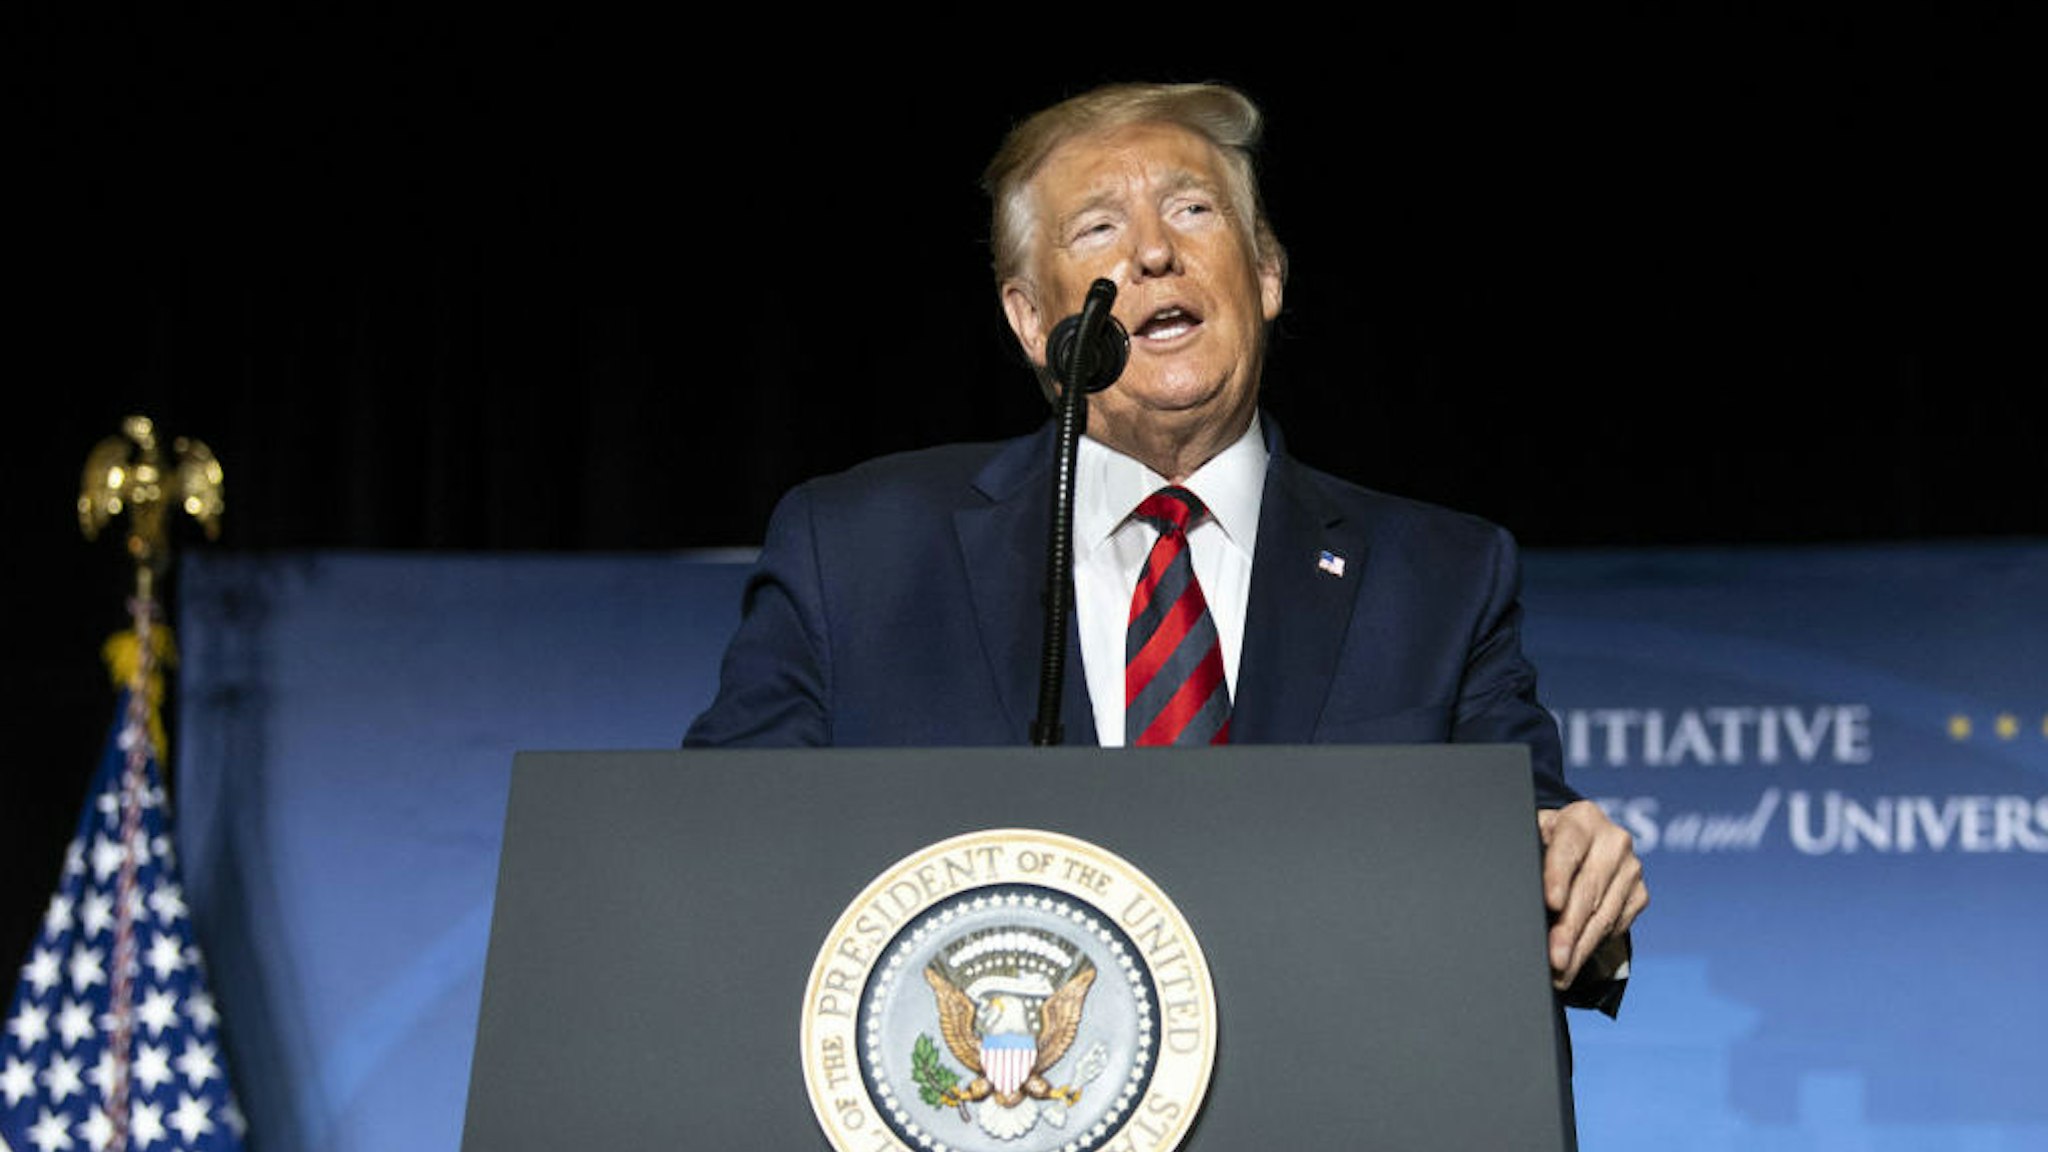 U.S. President Donald Trump speaks during the 2019 National Historically Black Colleges and Universities Week Conference in Washington, D.C., U.S., on Tuesday, Sept. 10, 2019. Trump said he fired his hawkish national security adviser, John Bolton, after disagreeing "strongly" with many of his positions, ending a tumultuous tenure marked by multiple setbacks in U.S. foreign policy.